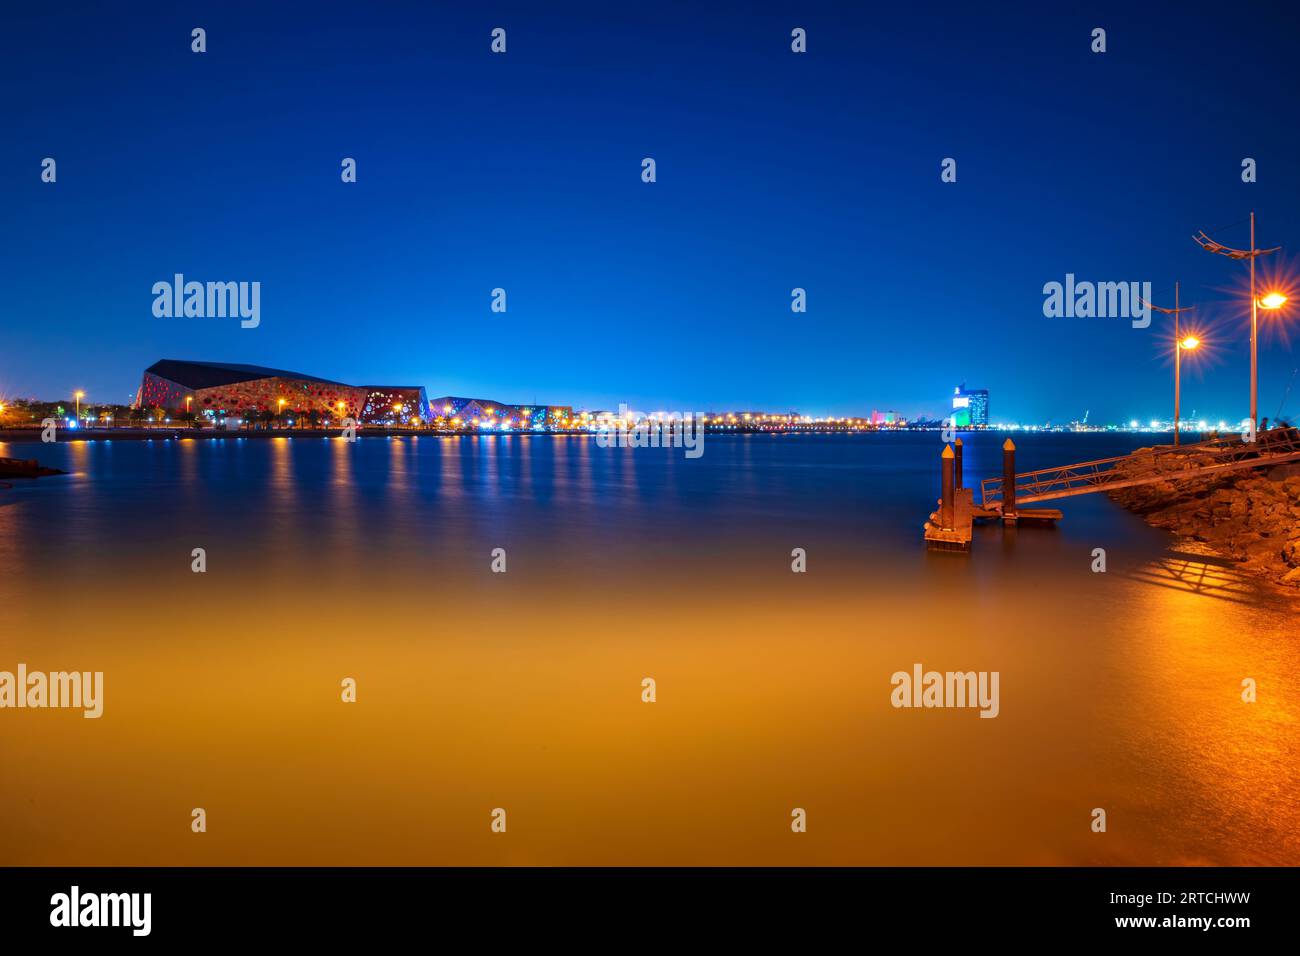 City skyline view from the beach bridge. Buildings and shore visible. Night view of Kuwait city and lights Stock Photo